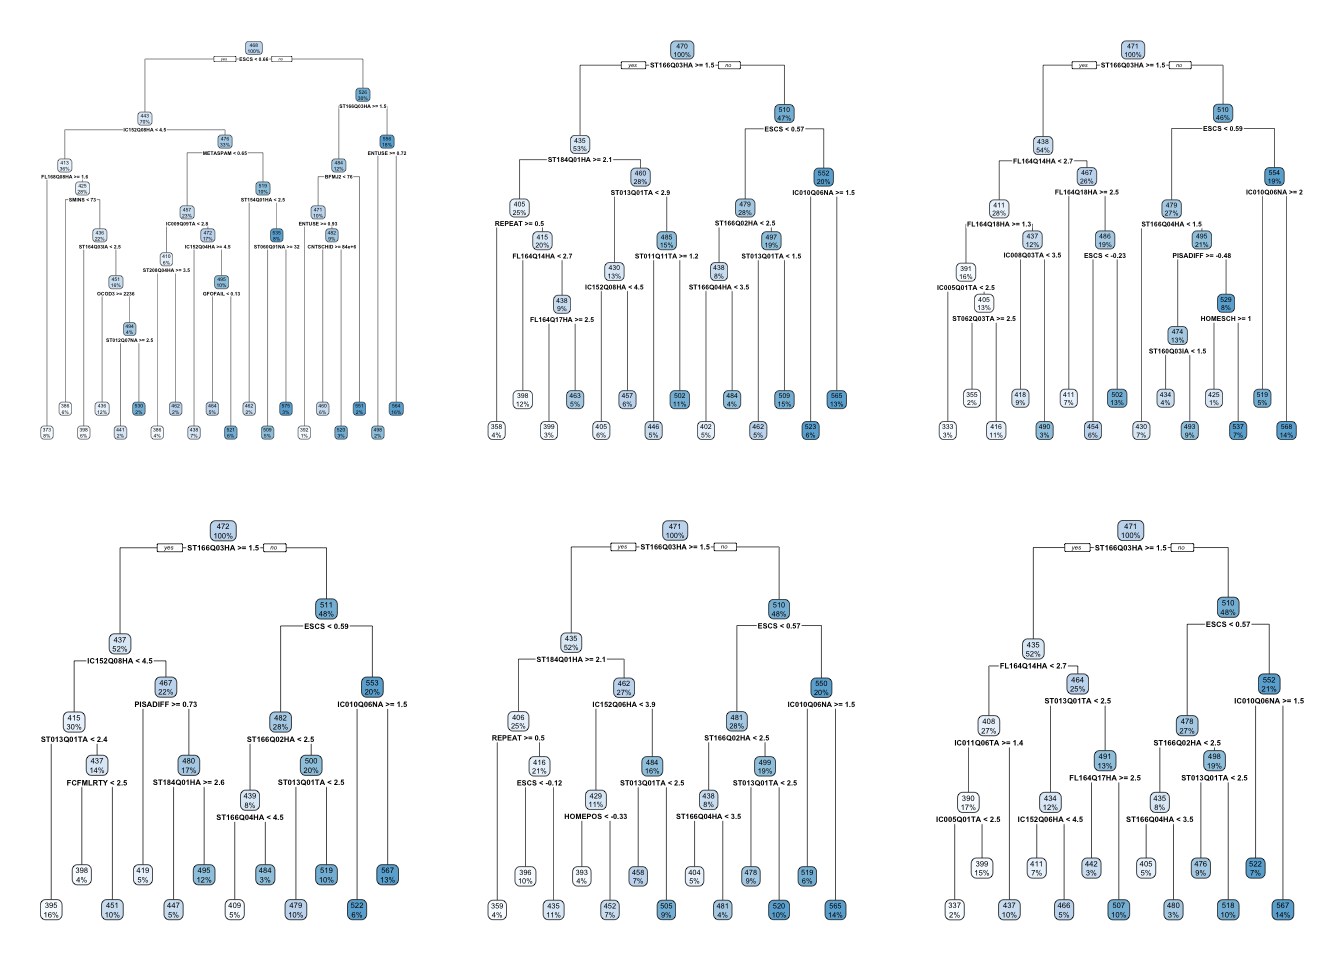 Visualization of many trees from the sample with varying compositions